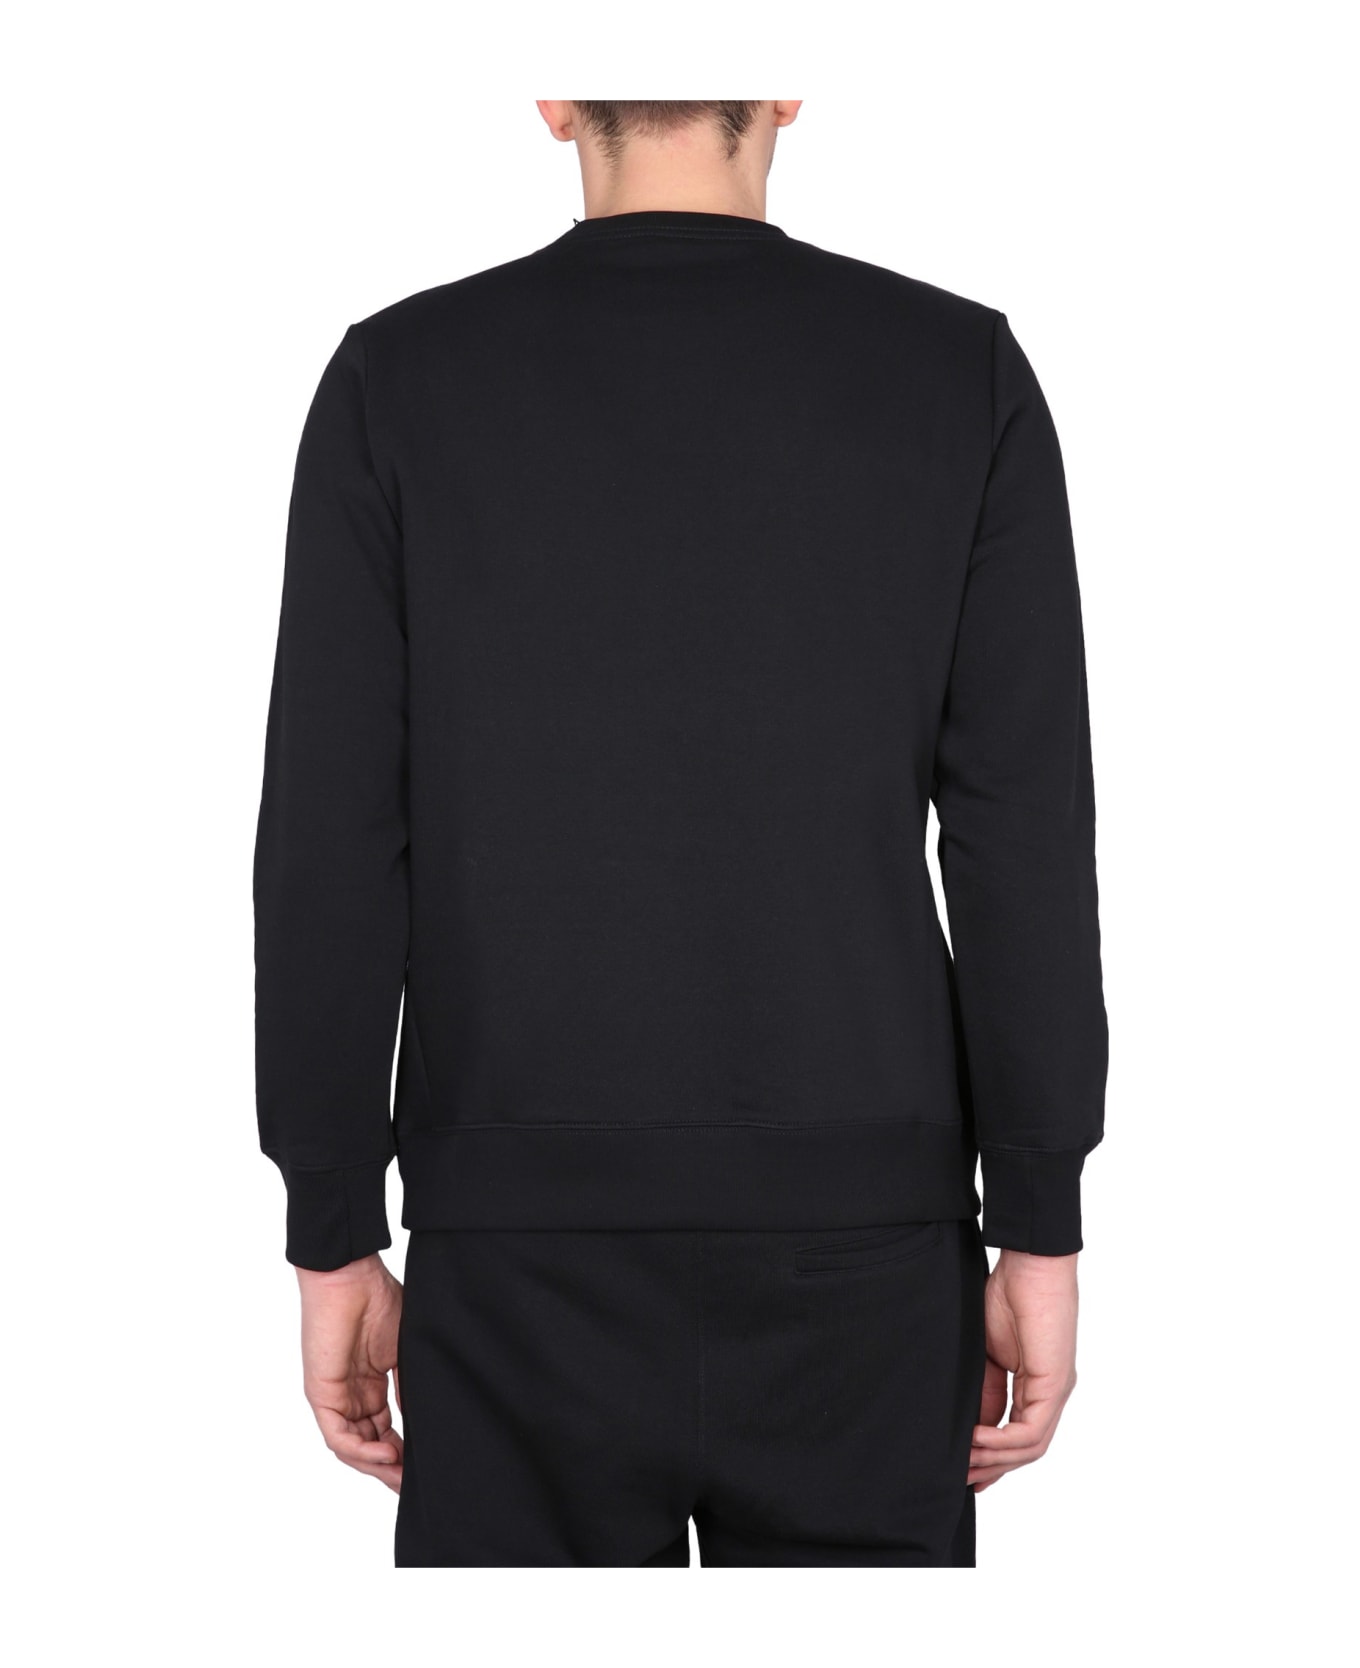 PS by Paul Smith Sweatshirt With Zebra Embroidery - Black フリース